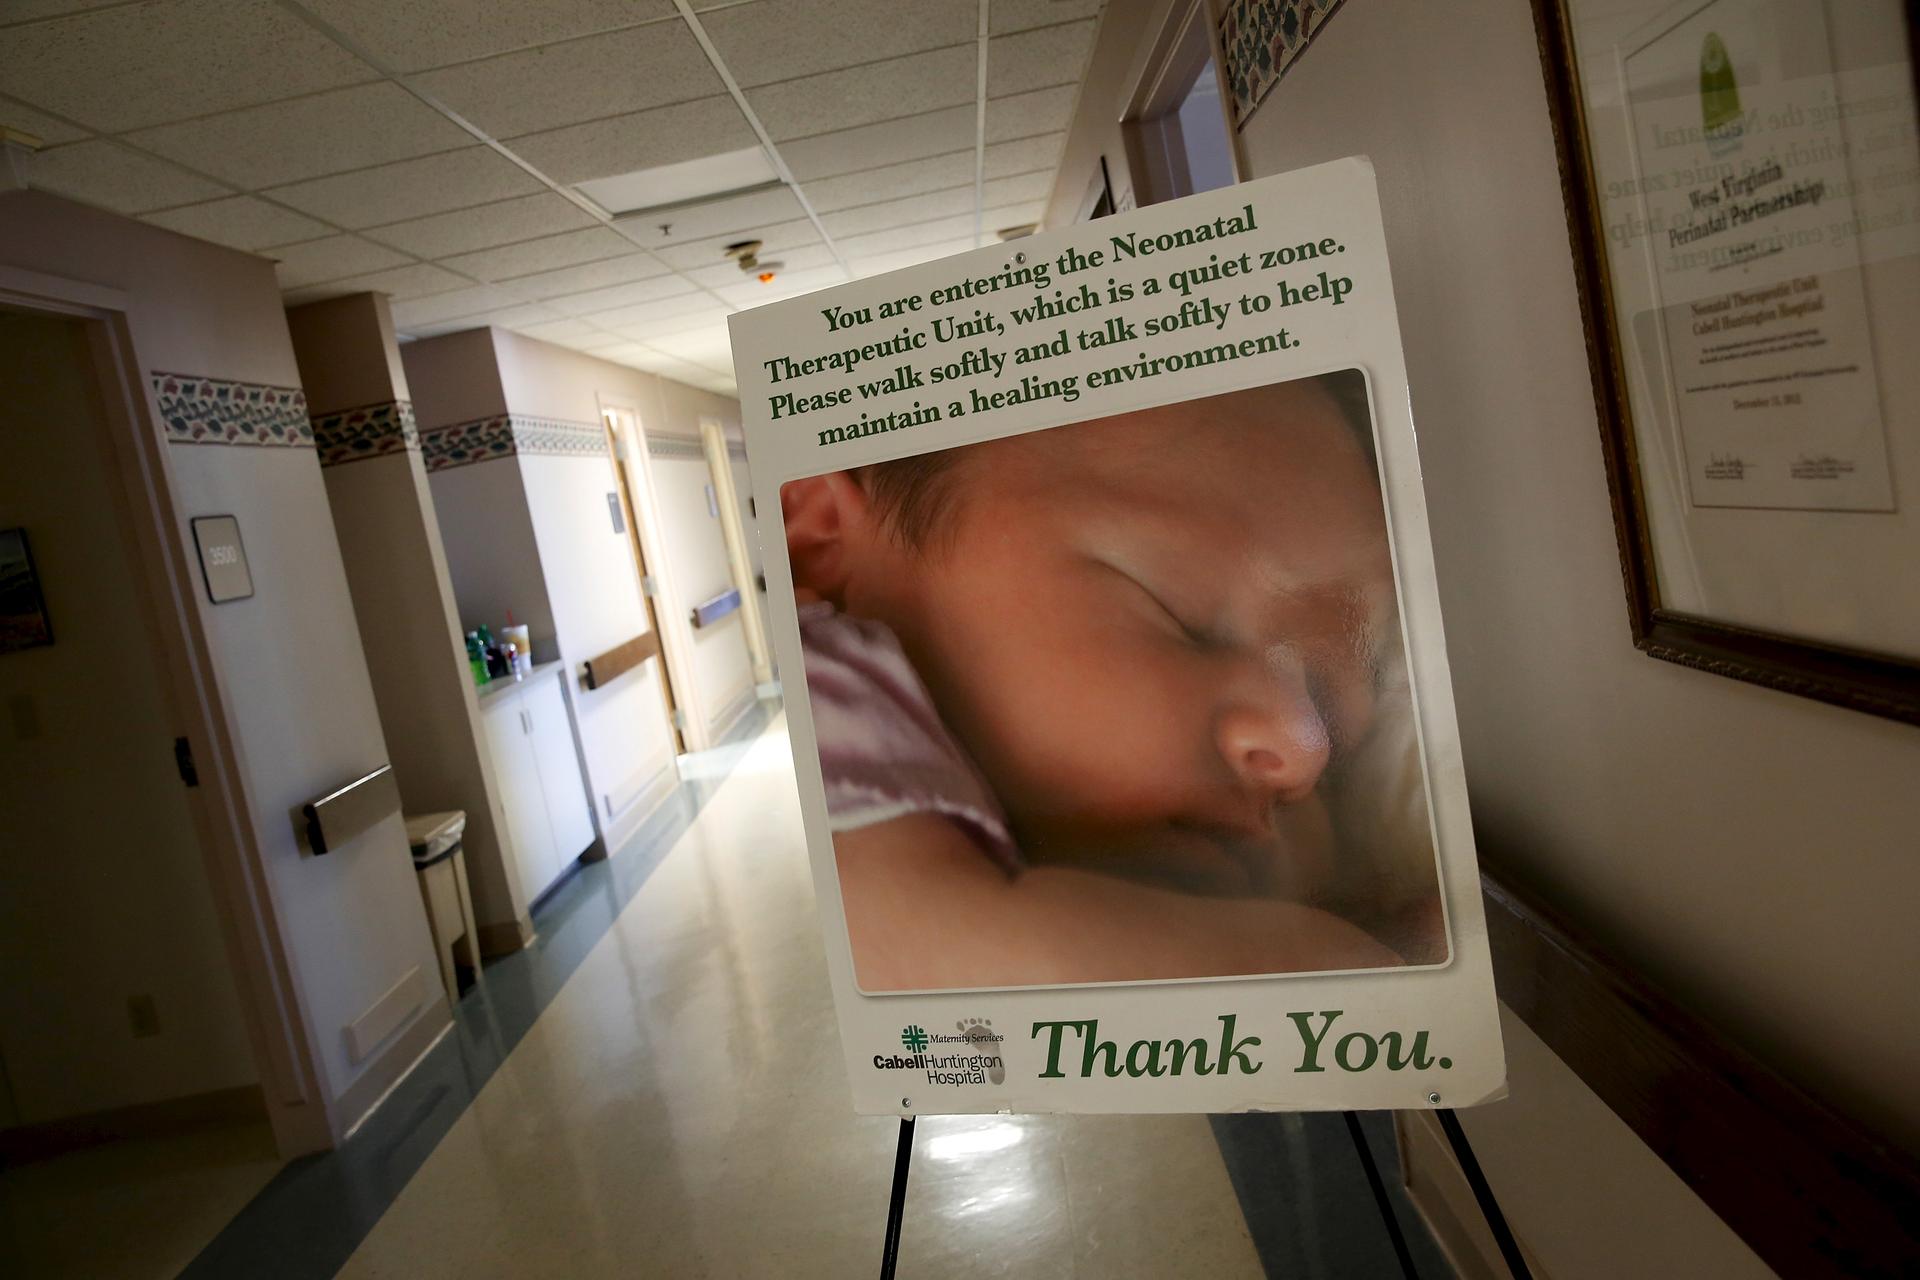 A sign marks the entrance to the Neonatal Therapeutic Unit at Cabell Huntington Hospital